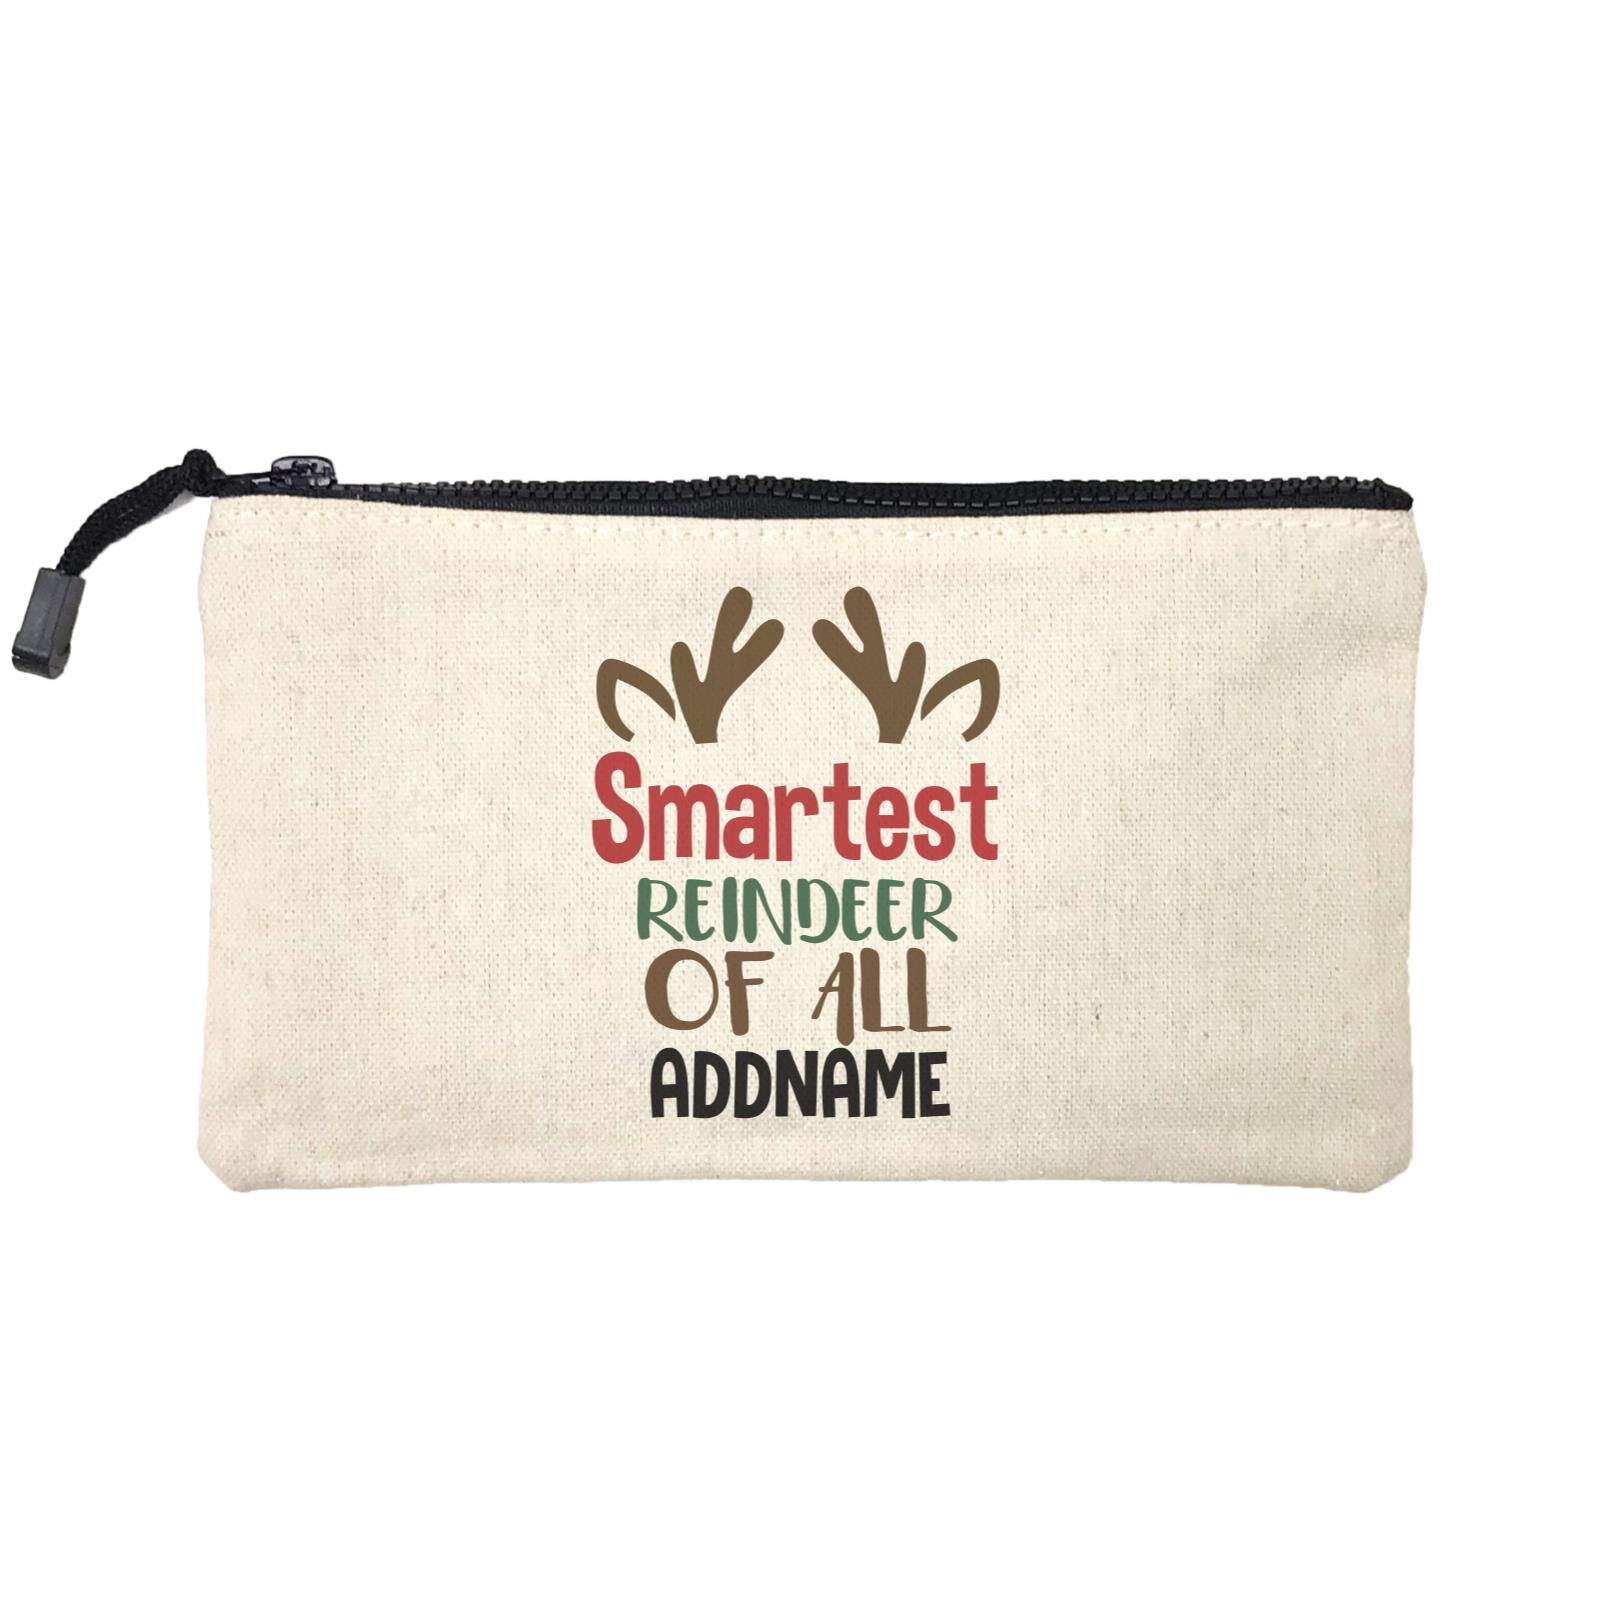 Xmas Smartest Reindeer of All Mini Accessories Stationery Pouch